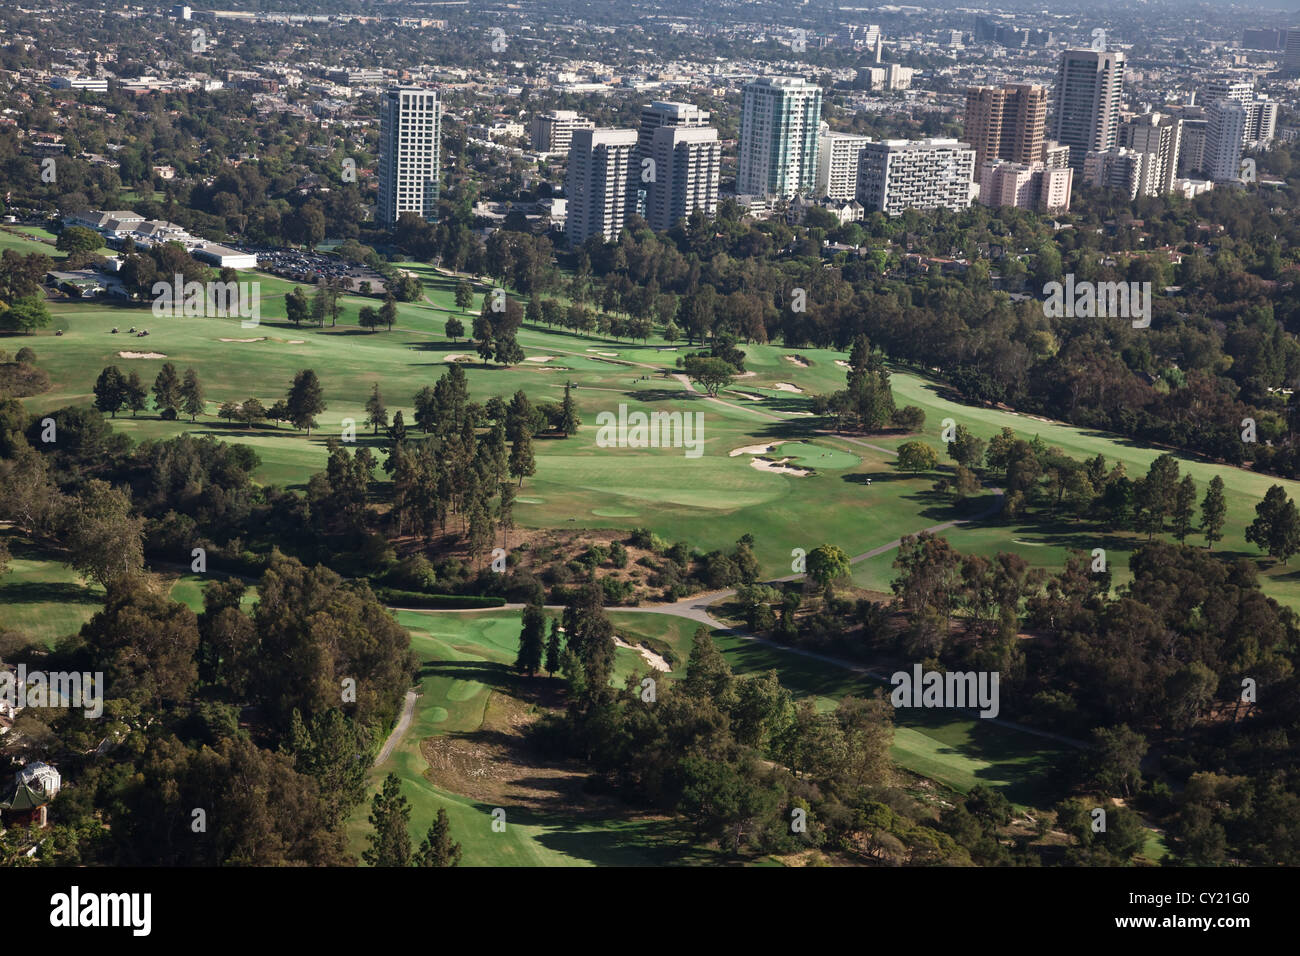 Views over the golf course at the Los Angeles Country Club Stock Photo